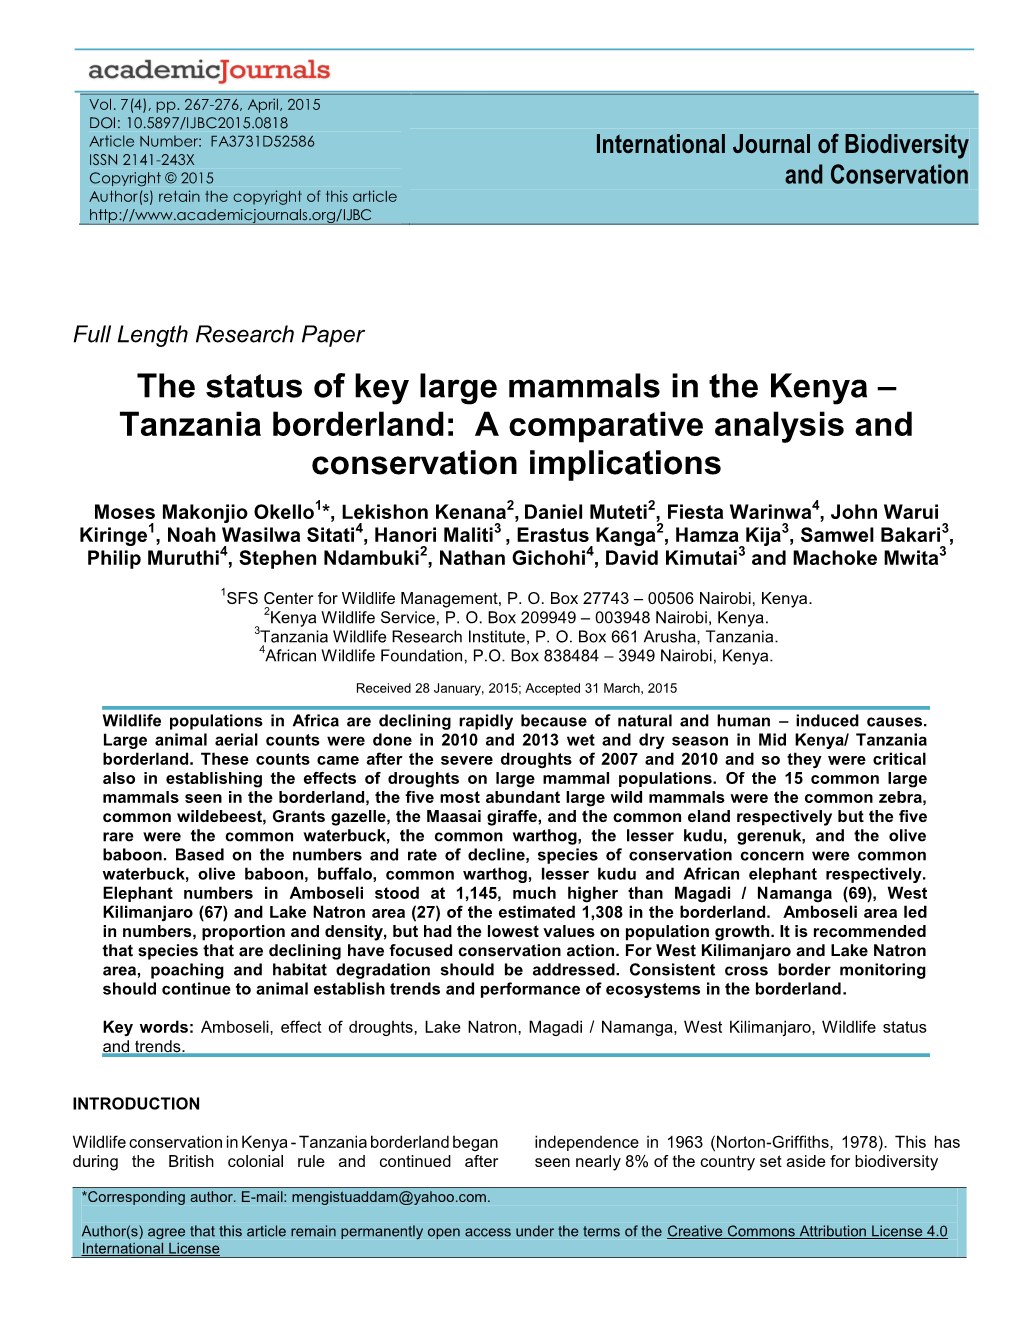 The Status of Key Large Mammals in the Kenya – Tanzania Borderland: a Comparative Analysis and Conservation Implications